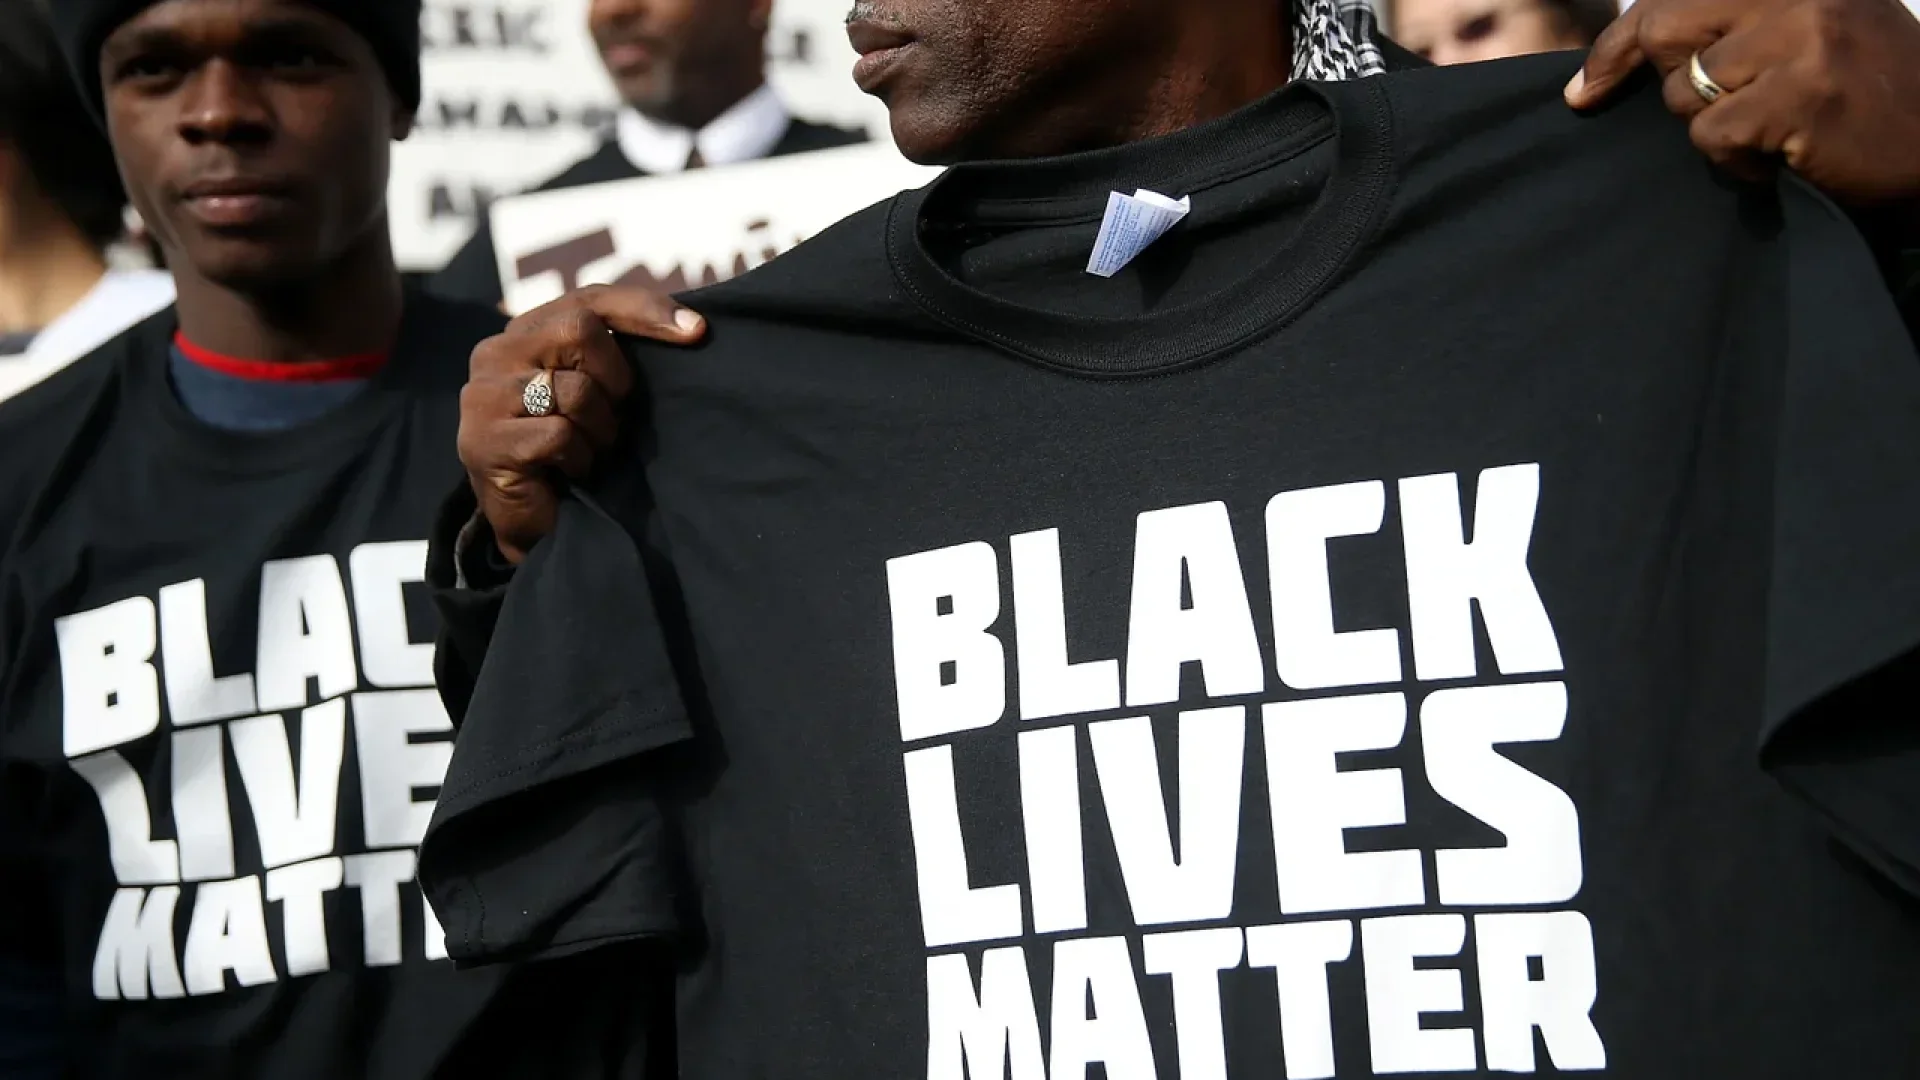 New Report Says Support For Black Lives Matter Movement Is At Lowest Point In 3 Years